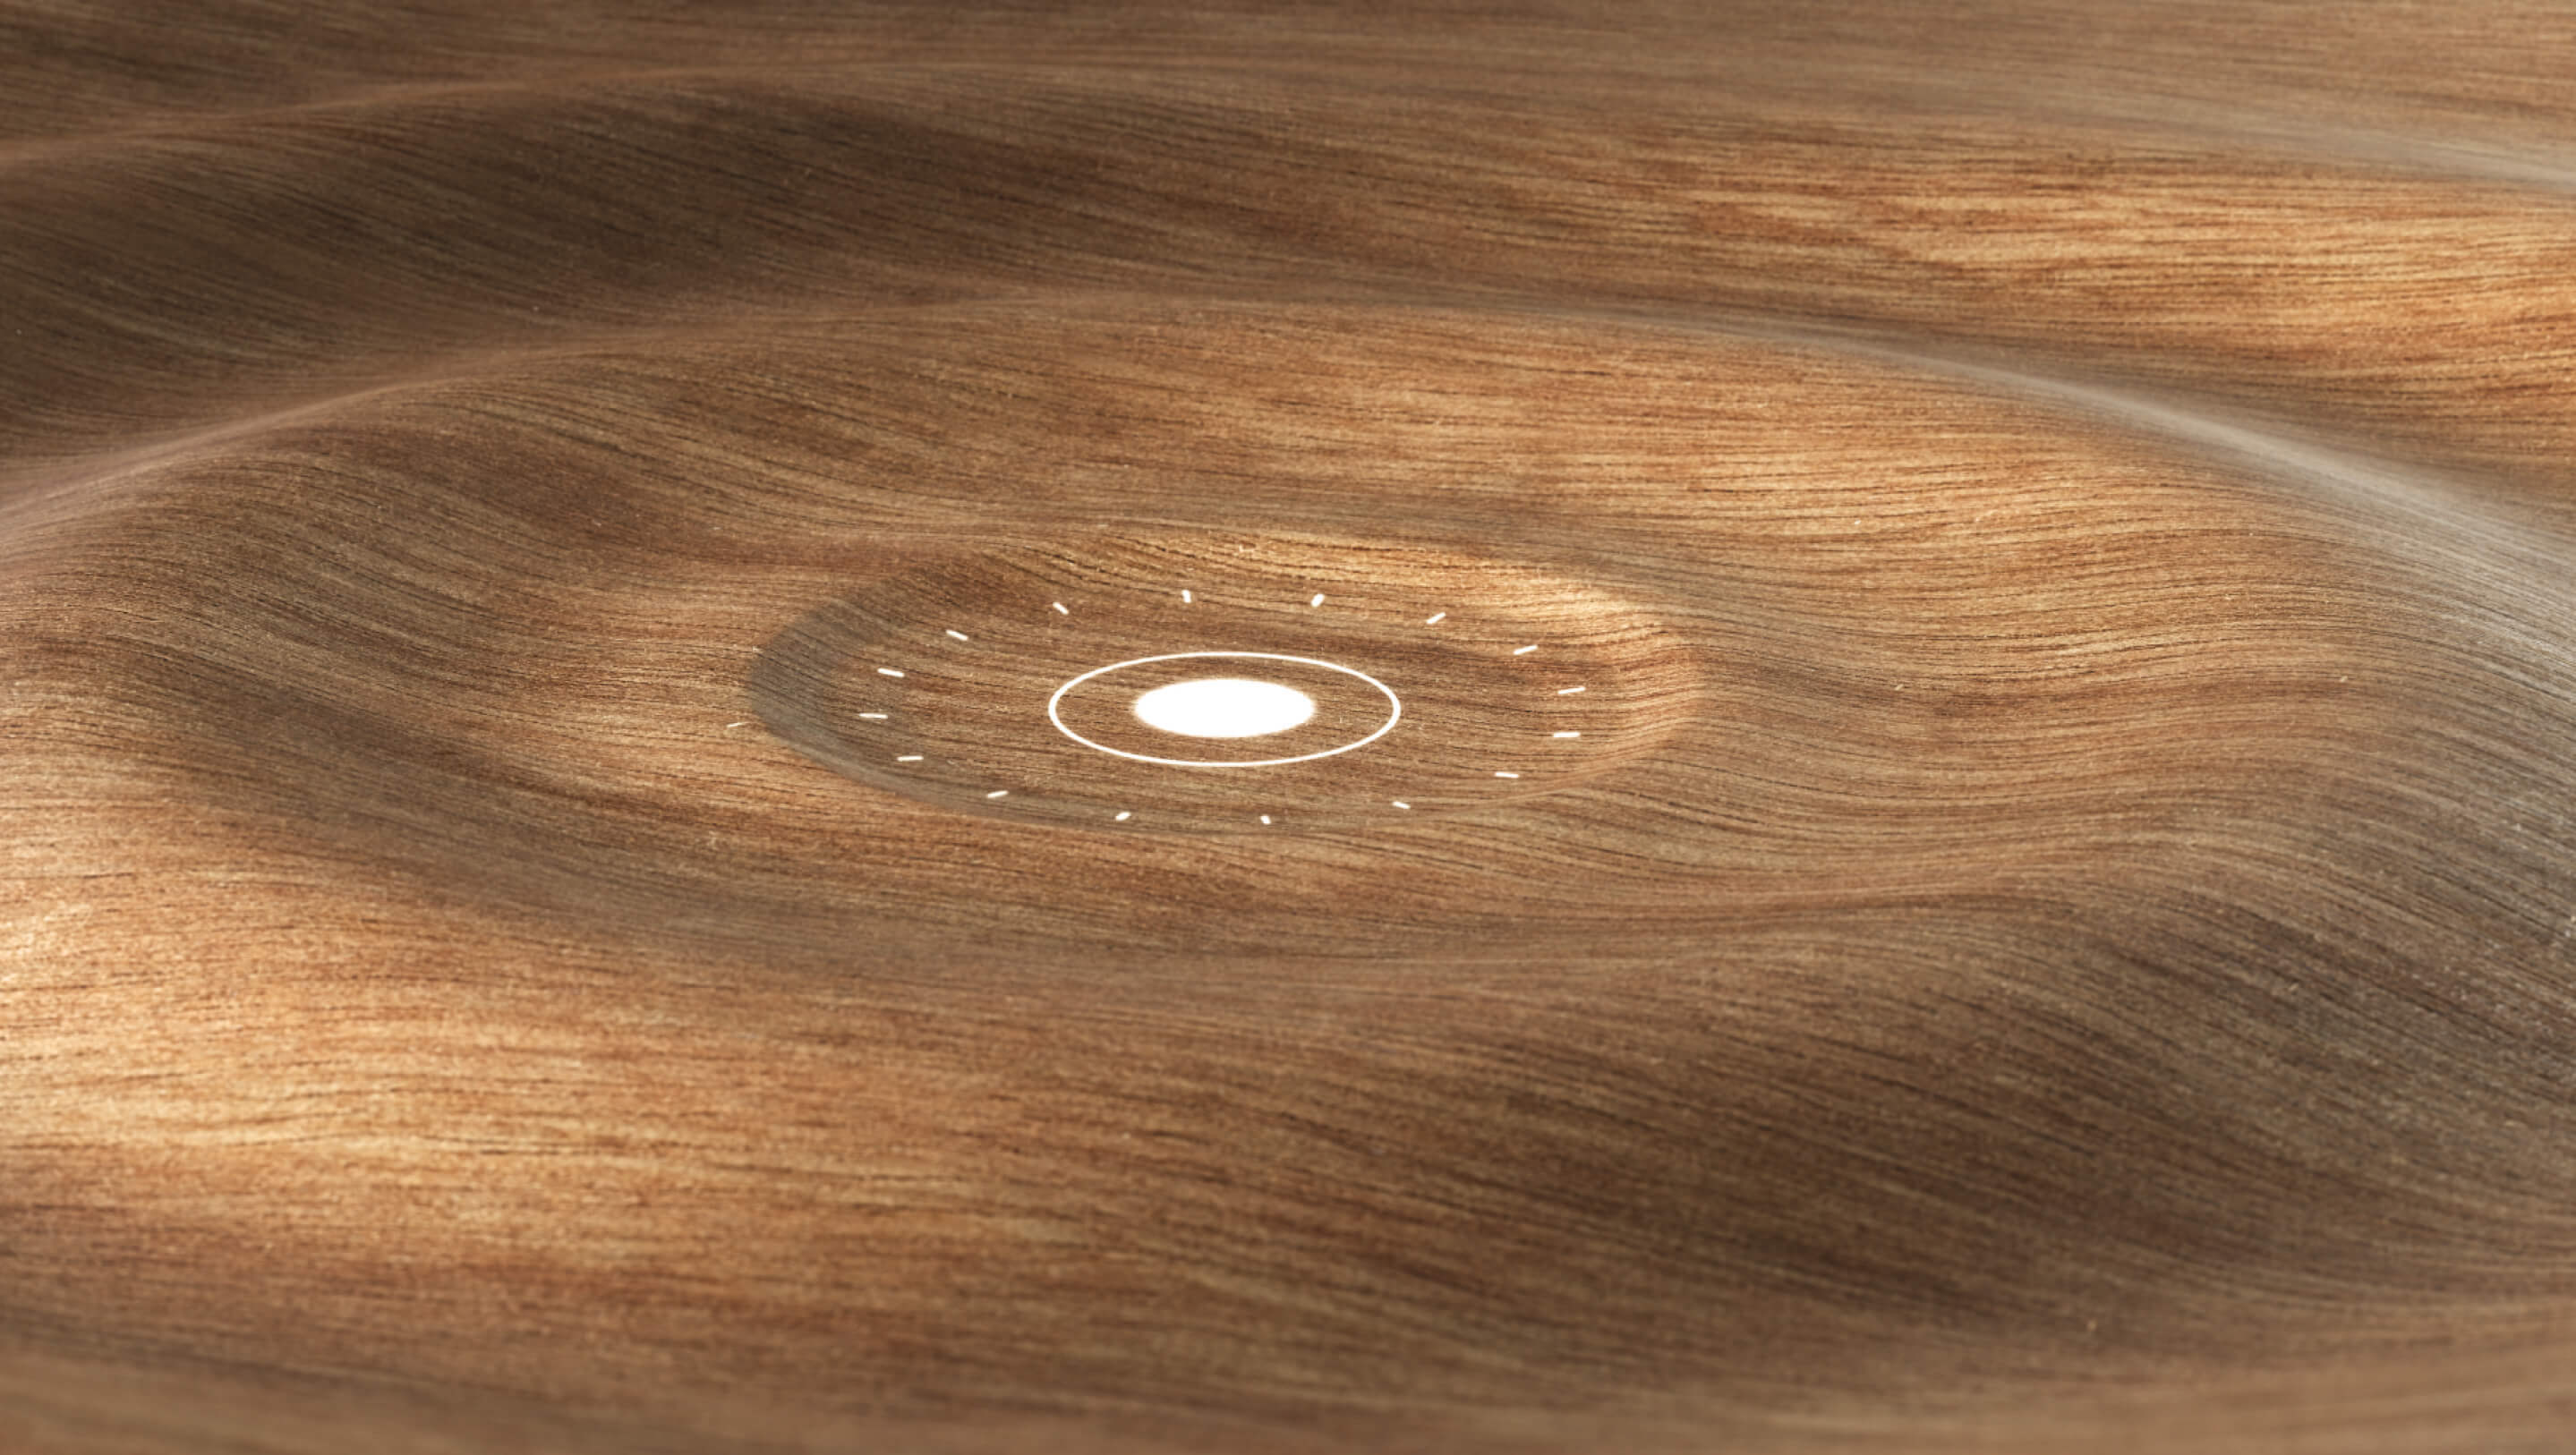 Droplet on wooden surface